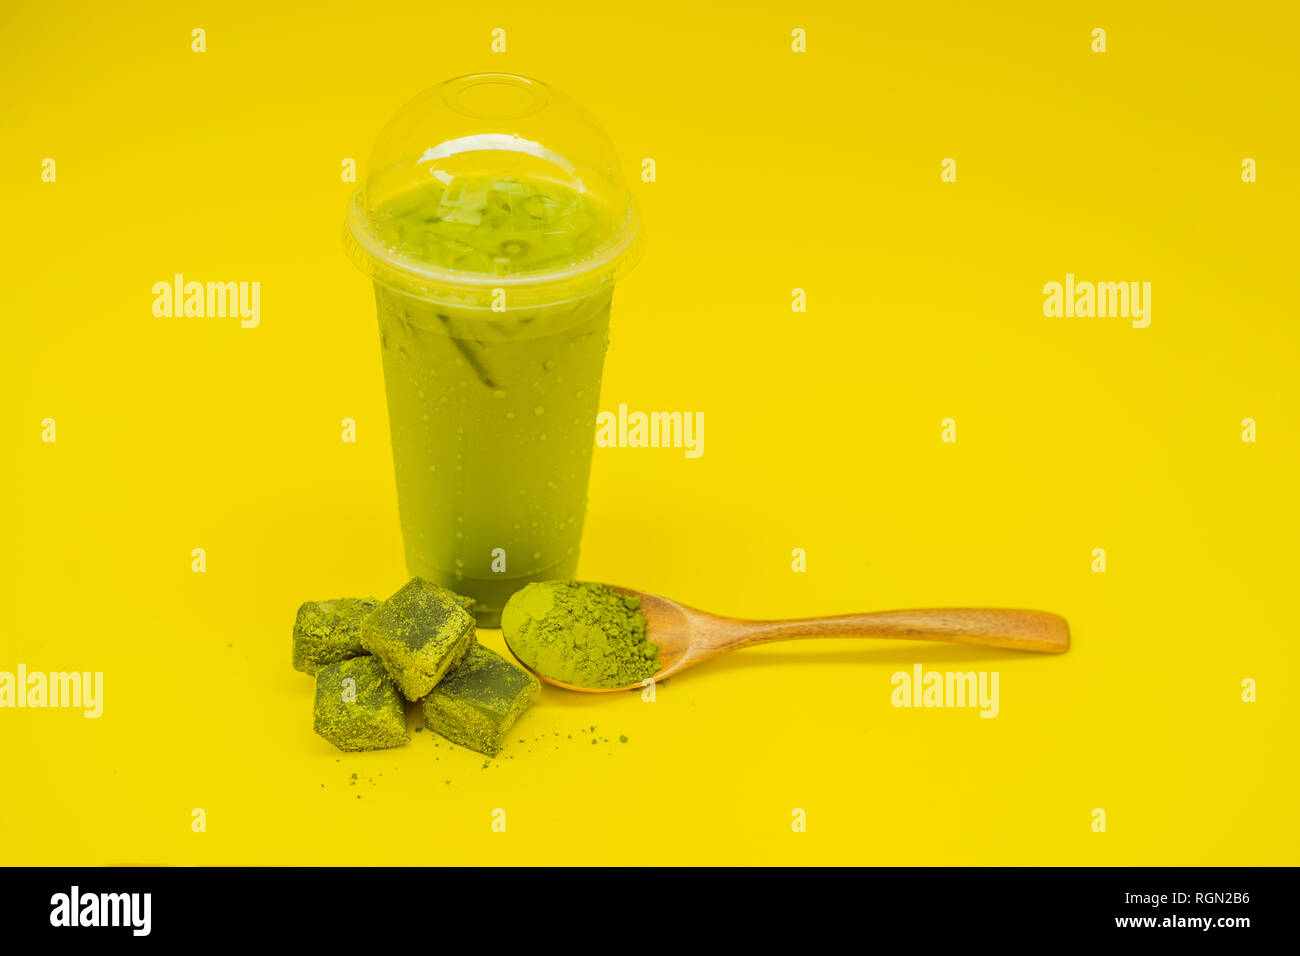 https://c8.alamy.com/comp/RGN2B6/green-tea-latte-with-ice-in-a-plastic-cup-and-straw-and-spoon-with-powder-matcha-on-yellow-background-homemade-iced-matcha-latte-tea-with-milk-zero-RGN2B6.jpg